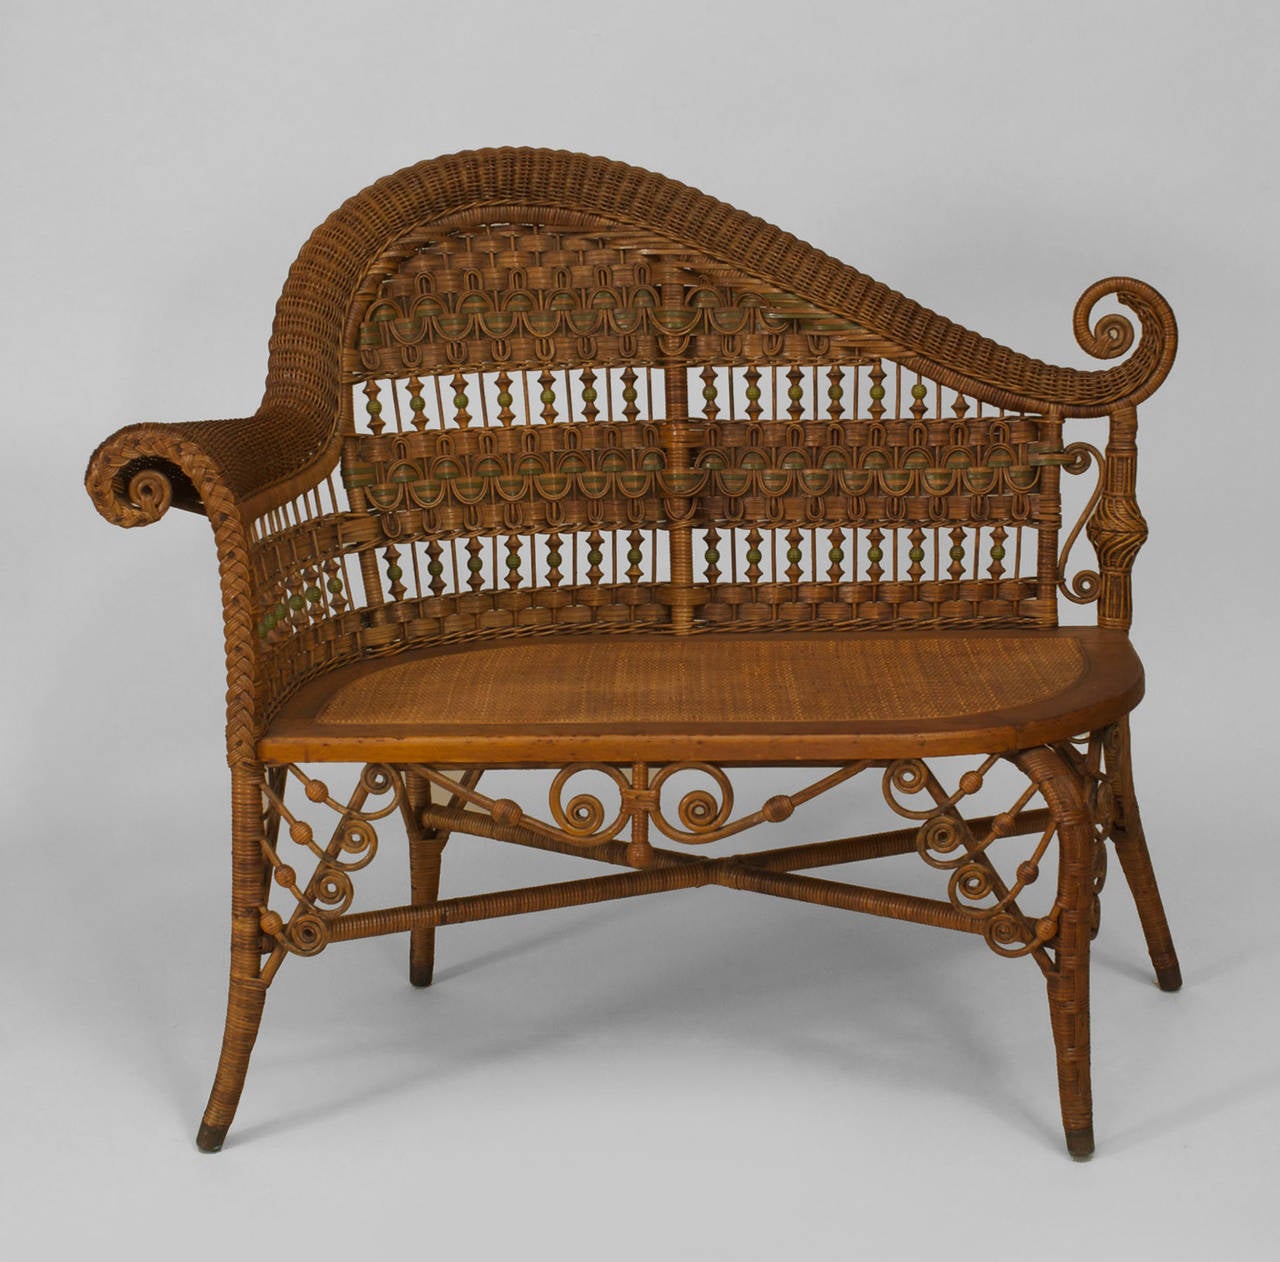 Attributed to Heywood Wakefield, a 19th century American natural wicker and green decorated trimmed recamier (or photographer's bench) designed with scroll and spindle designs and a woven seat.